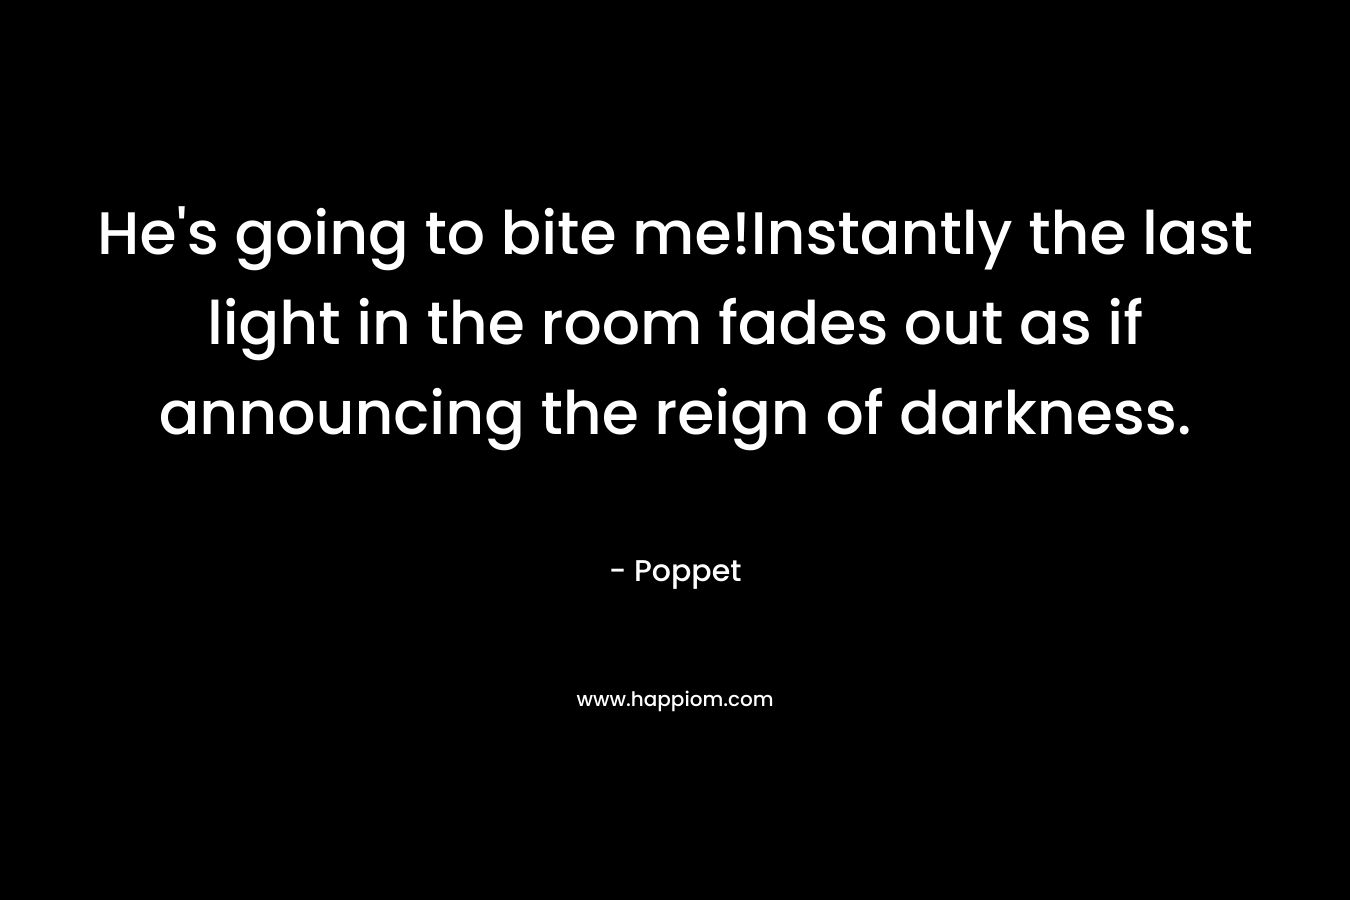 He’s going to bite me!Instantly the last light in the room fades out as if announcing the reign of darkness. – Poppet